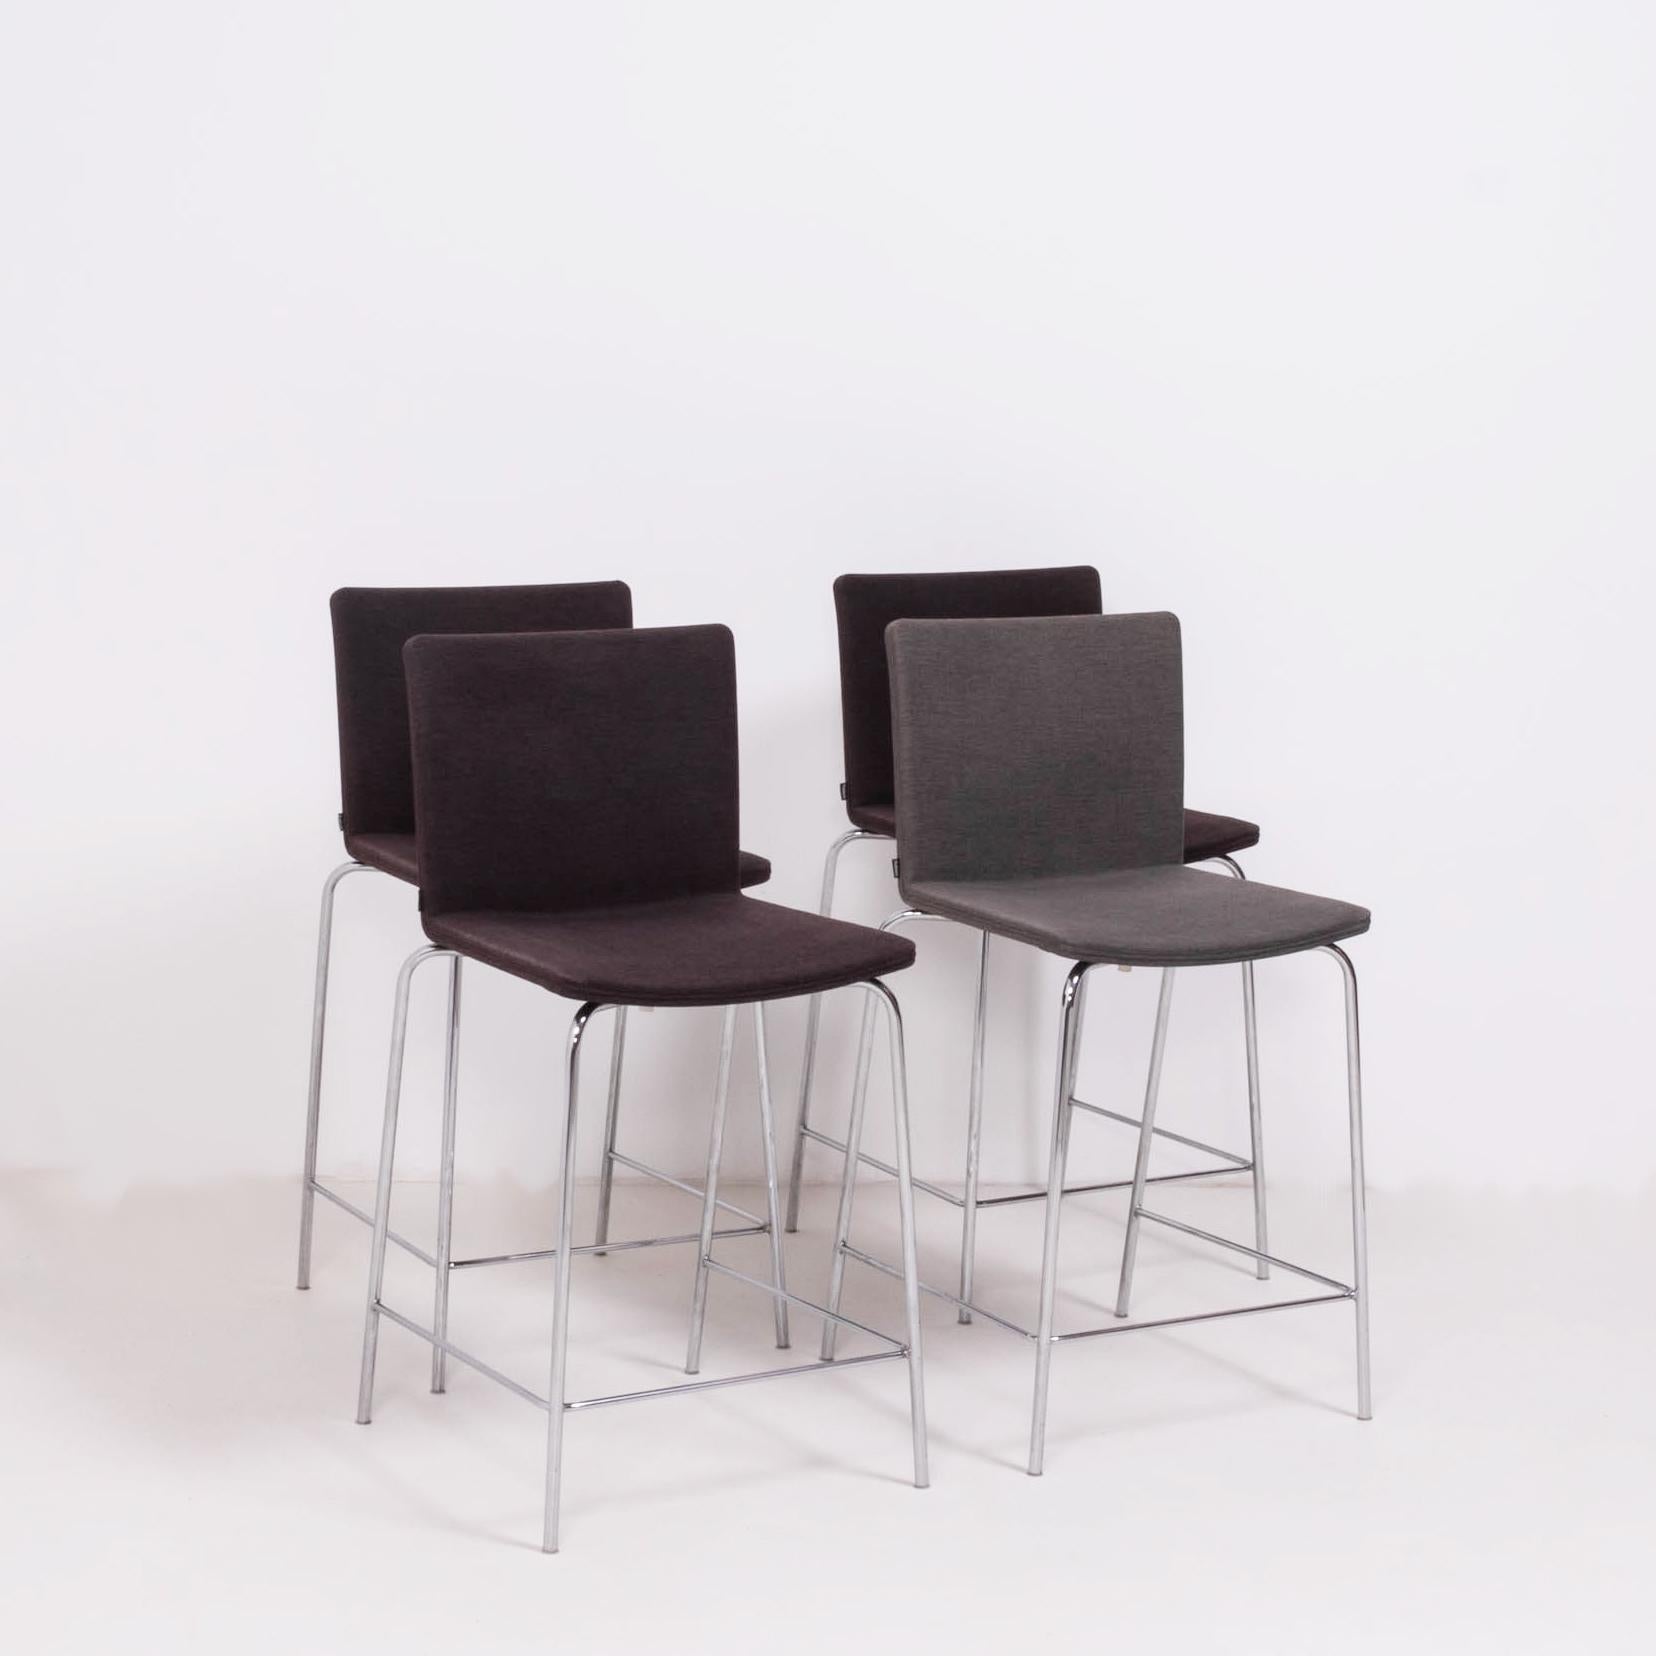 Originally designed by Mario Mazzer for Poliform in 2003, the Nex stool is the epitome of sleek and modern design.

Featuring a chromed metal frame with a foot rail, the seats are molded for comfort and are upholstered in Classic dark and light